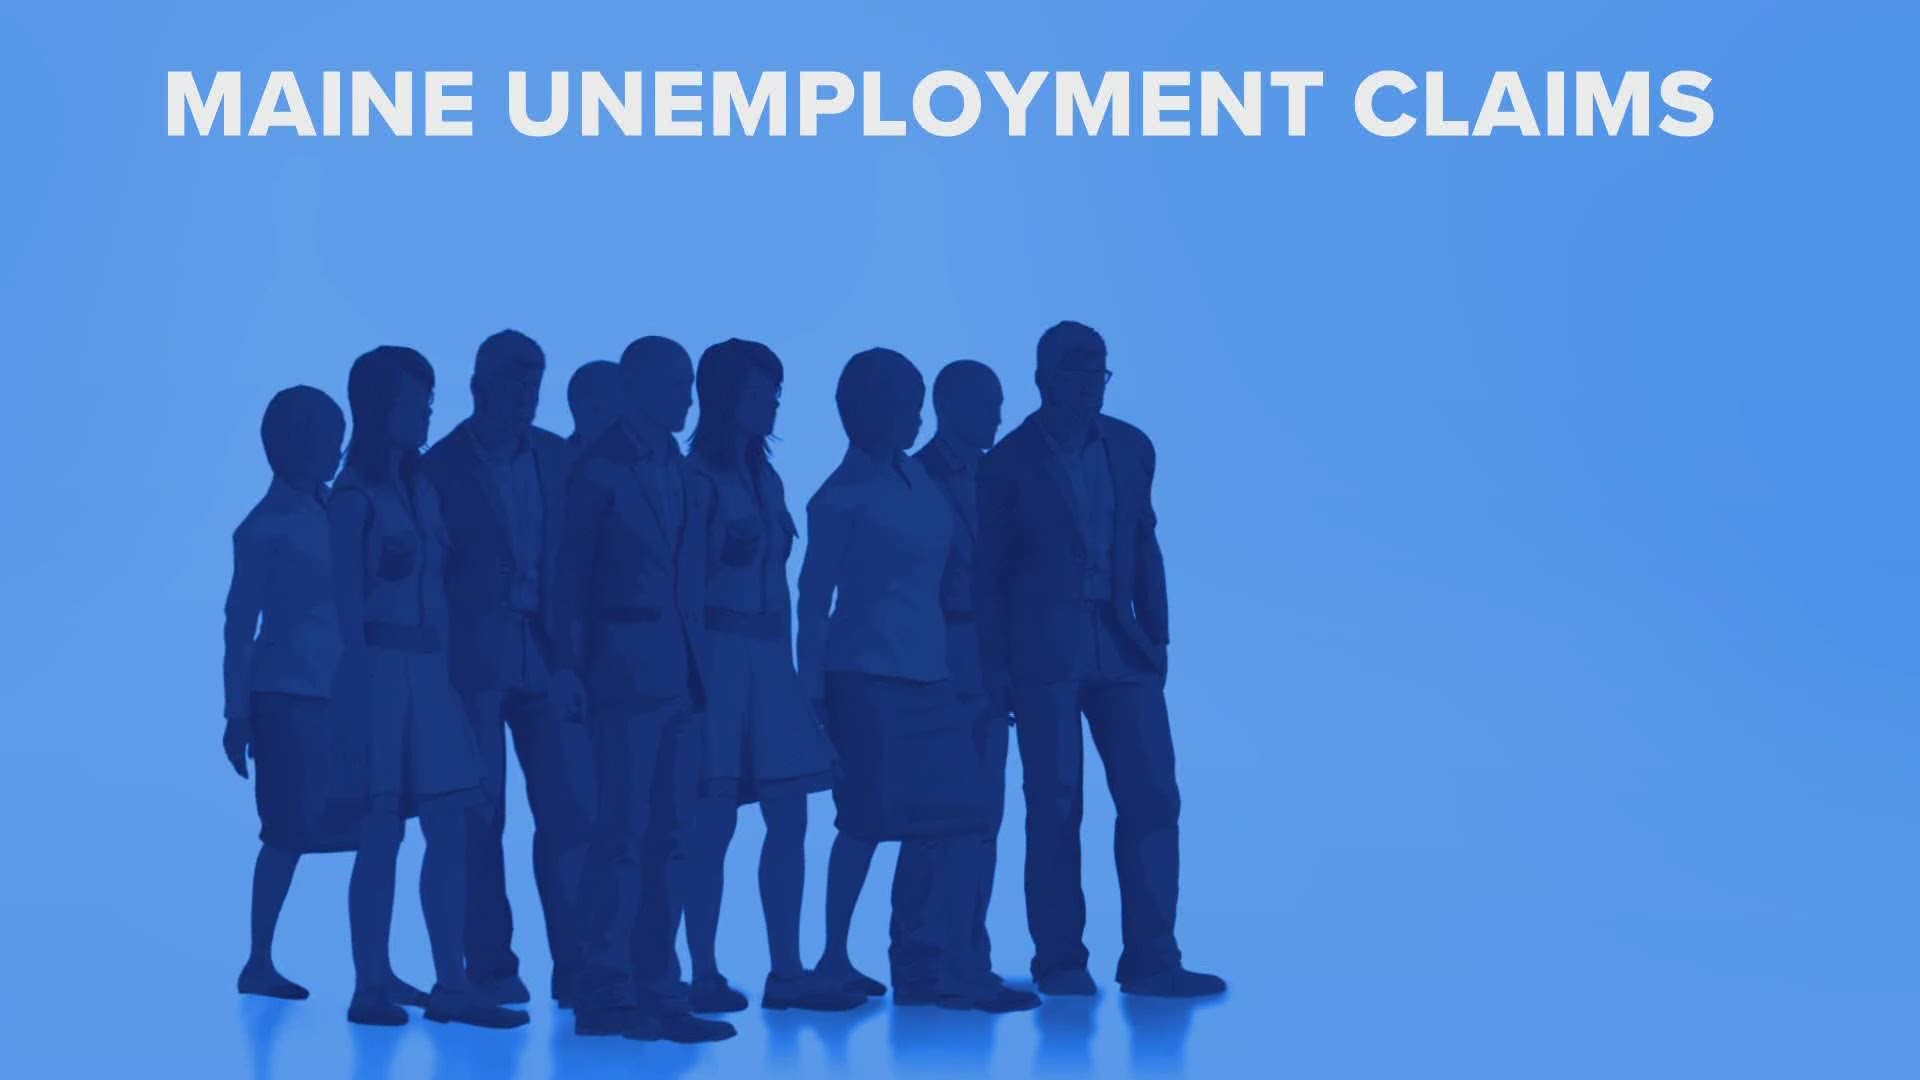 Unemployment claims in Maine at historic levels